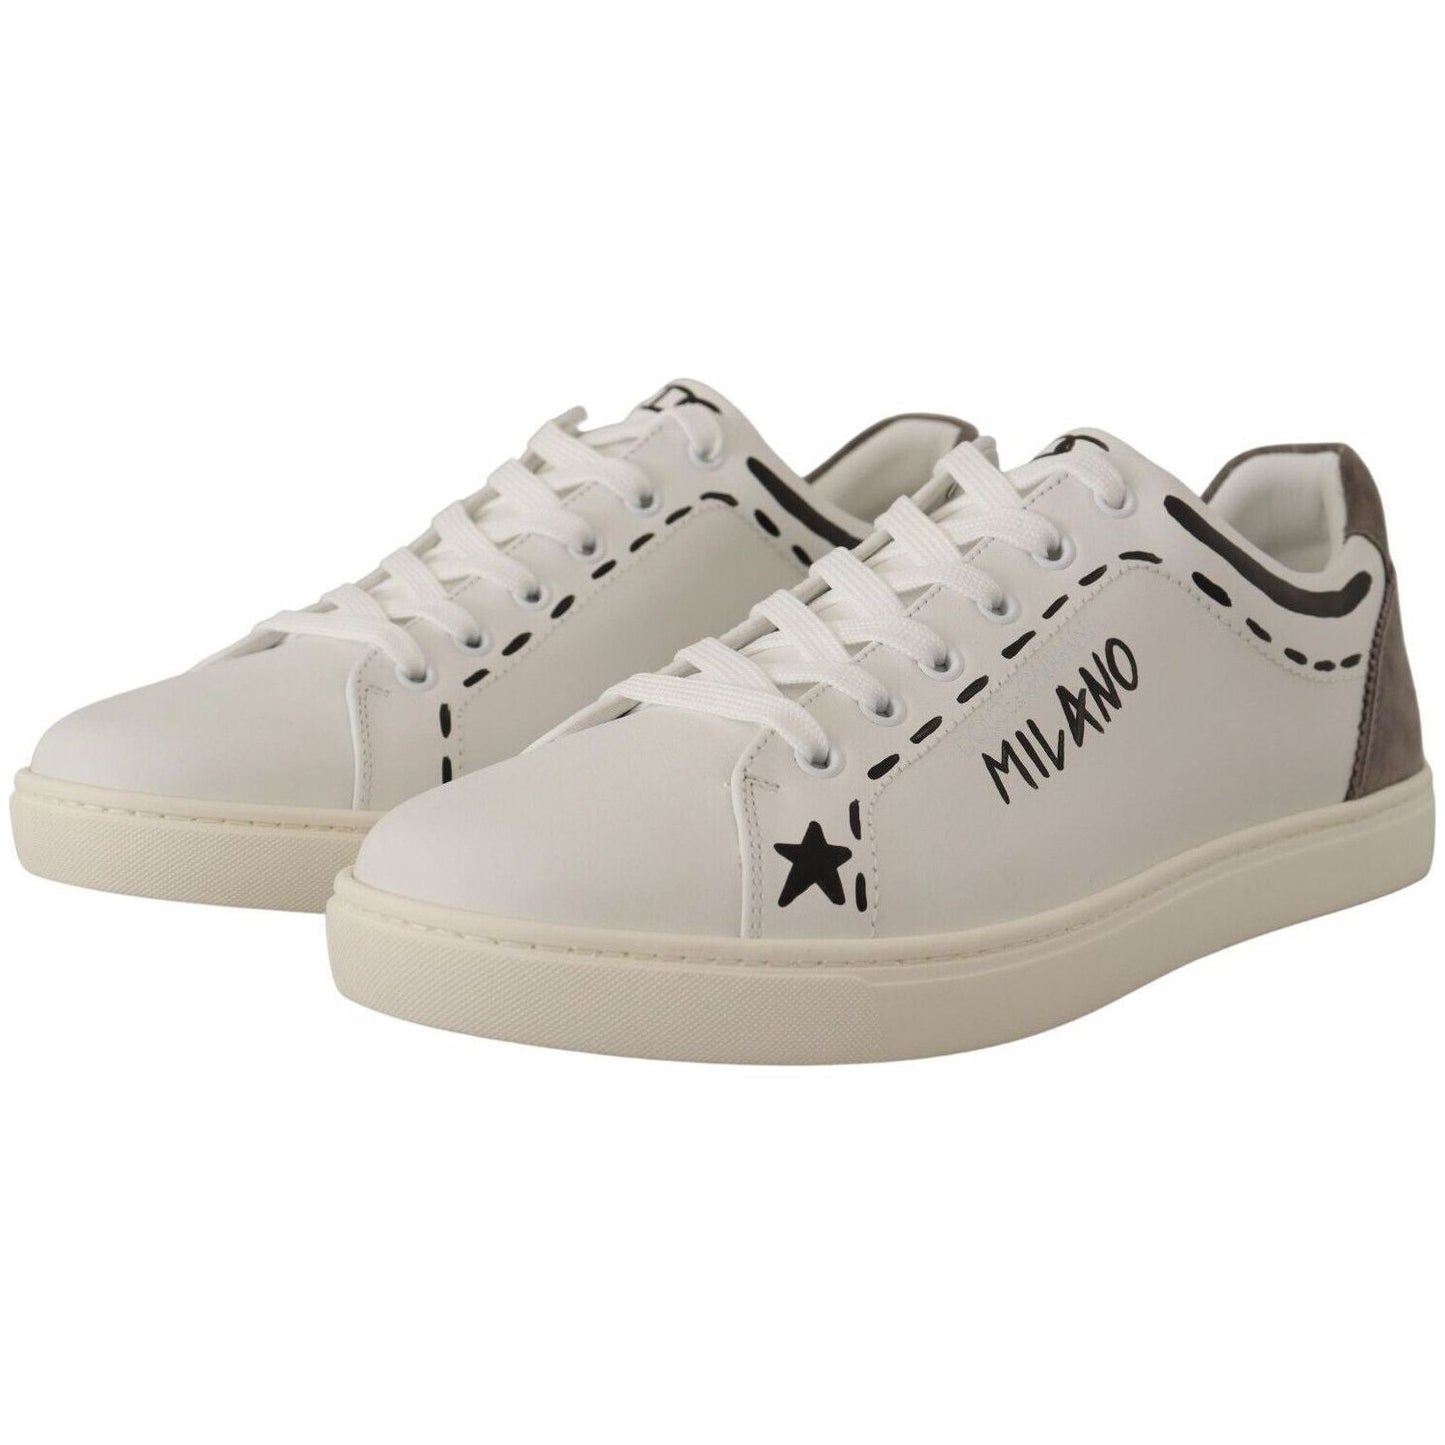 Dolce & Gabbana | White Leather Gray LOVE Casual Sneakers Shoes  | McRichard Designer Brands